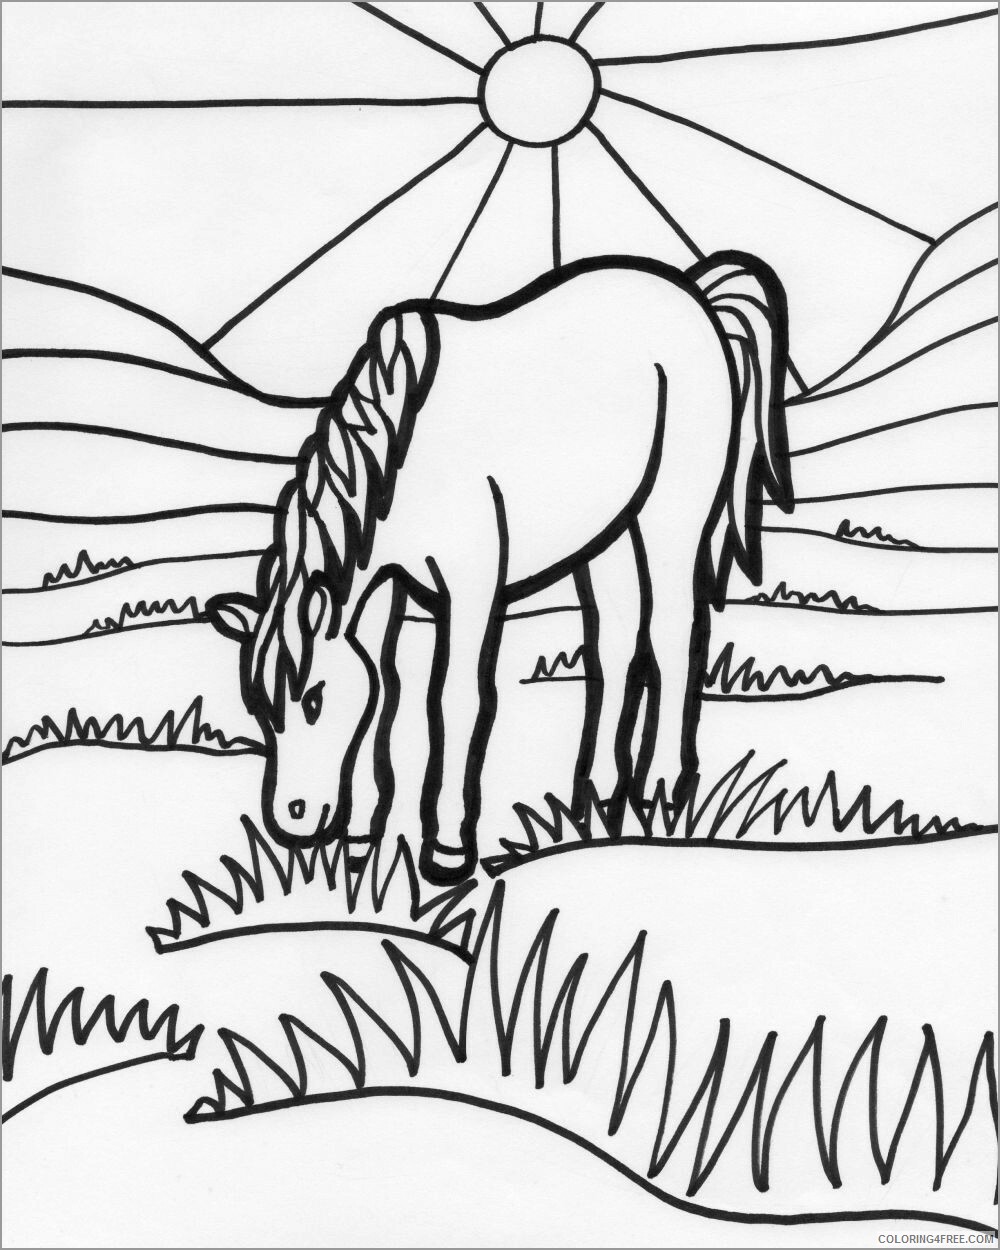 Horses Coloring Pages Animal Printable Sheets horse just horse n around 2021 2760 Coloring4free